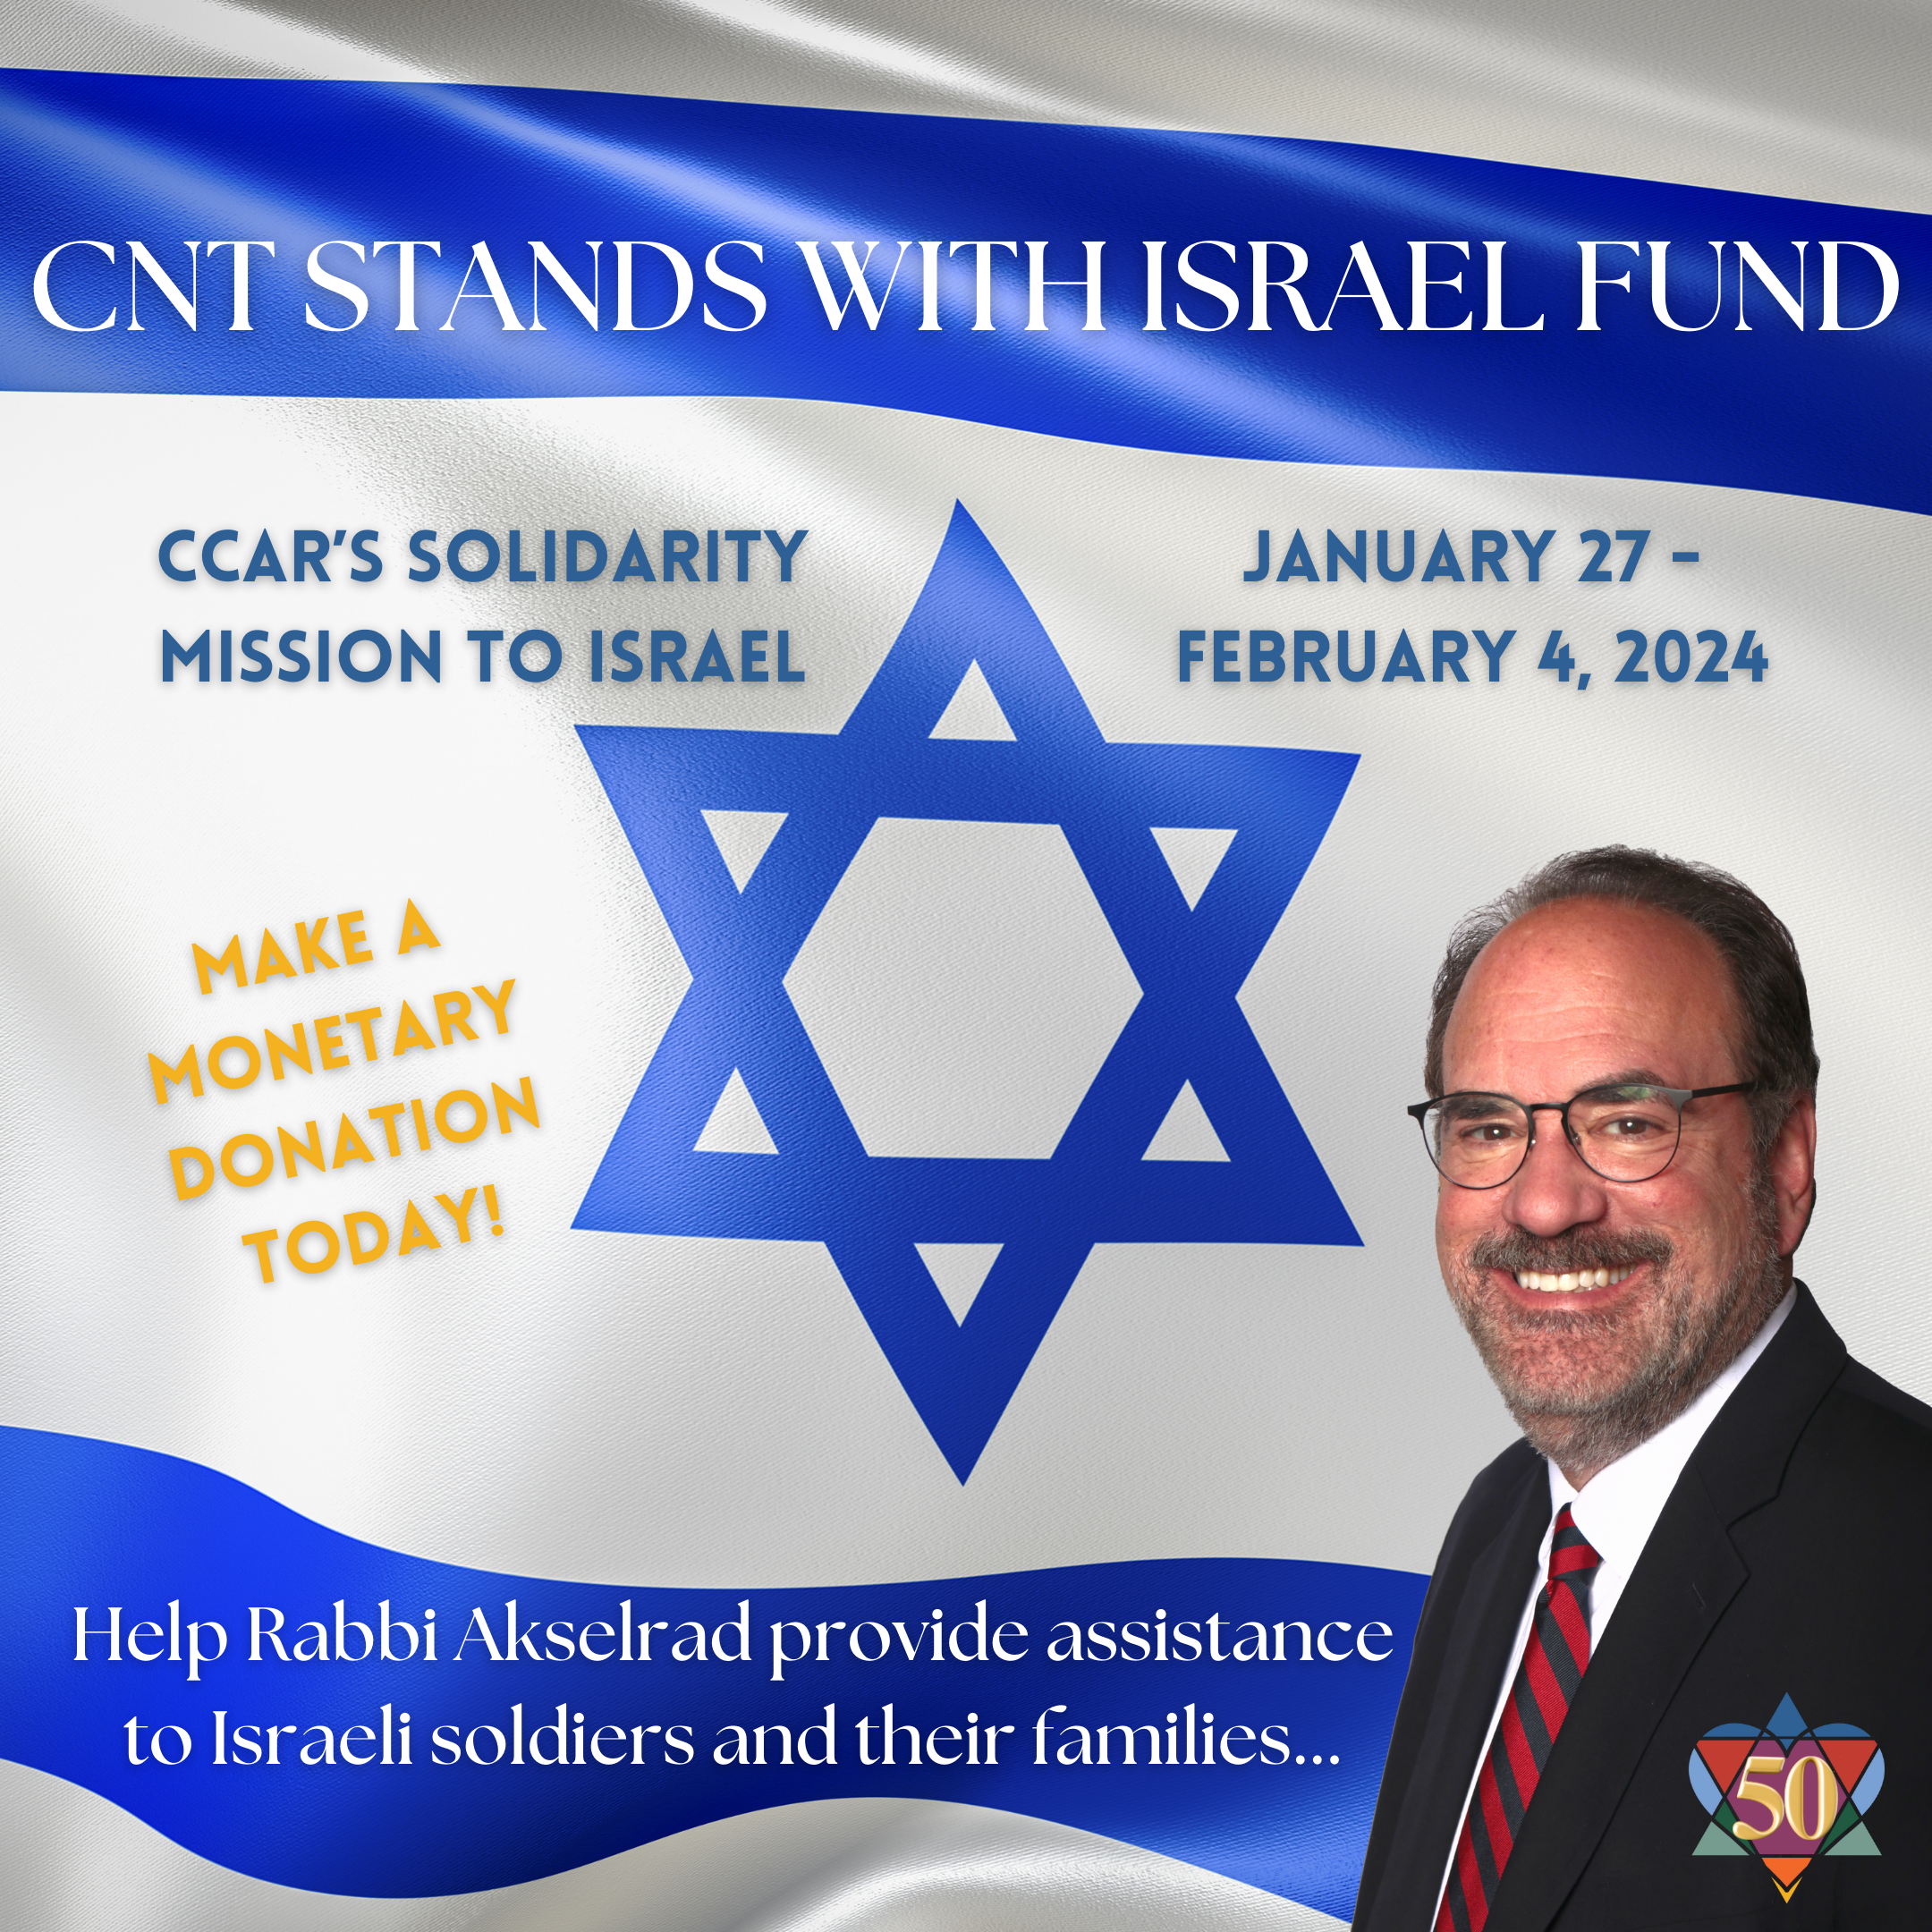 CNT STANDS WITH ISRAEL FUND